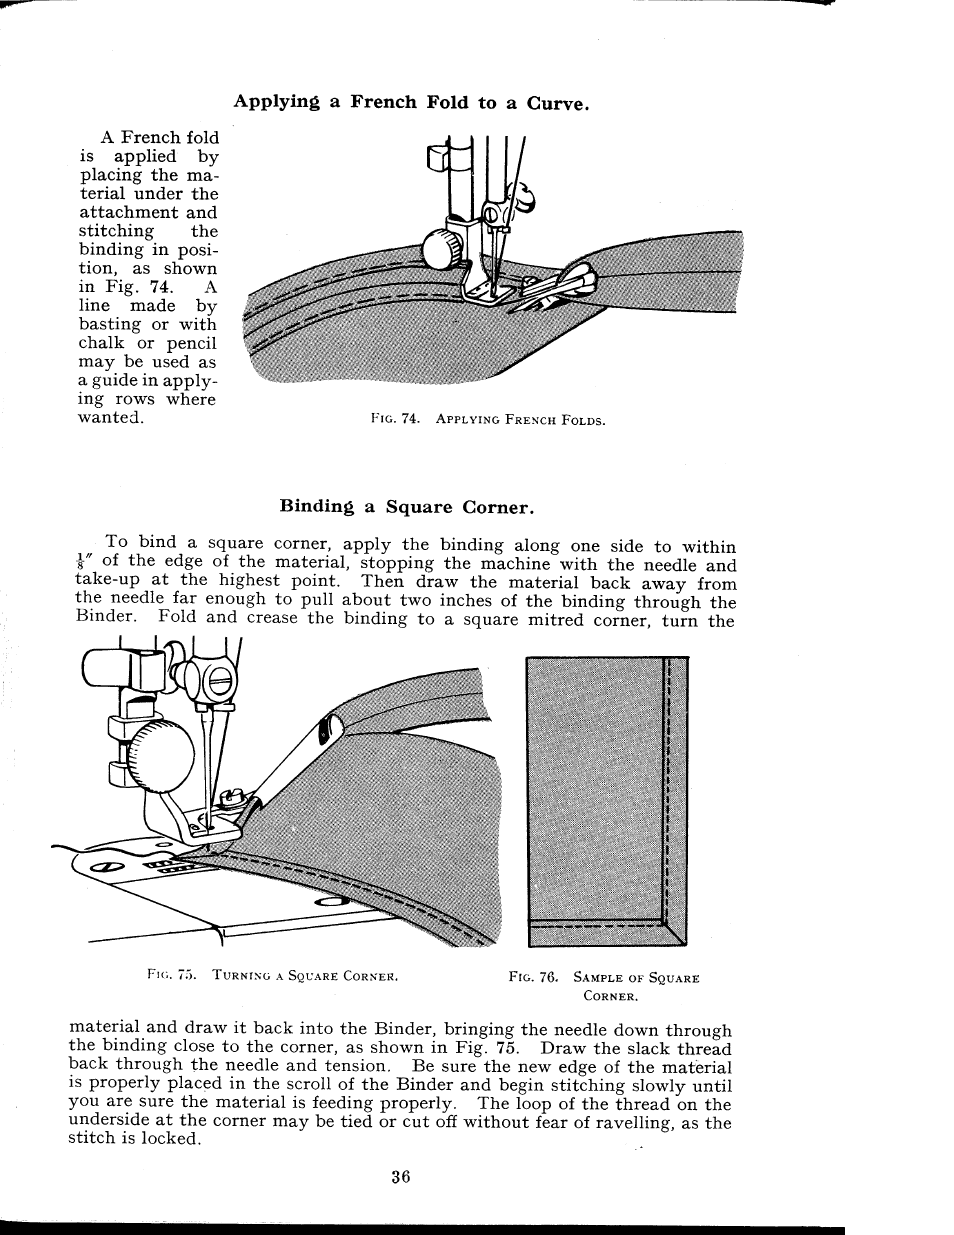 Binding a square corner, Applying a french fold to a curve | SINGER 404K User Manual | Page 36 / 78